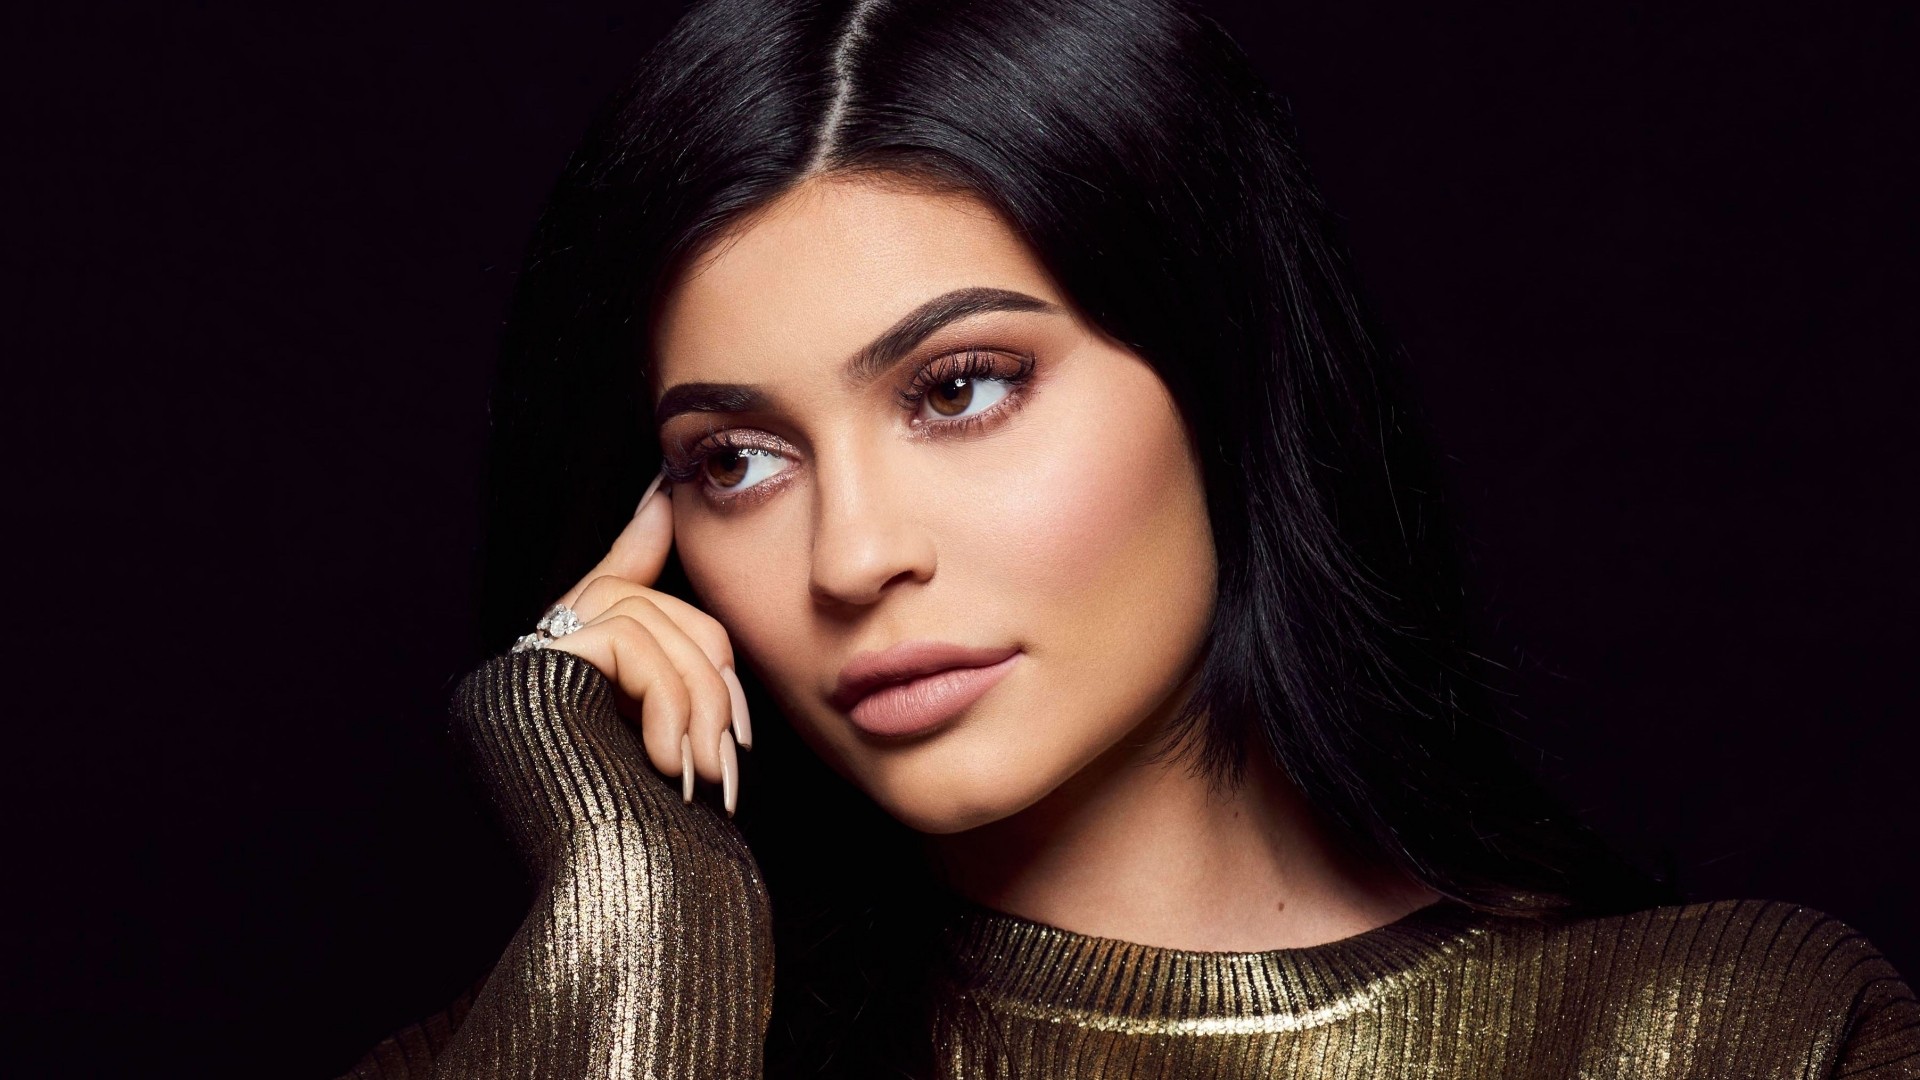 New Kylie Jenner 2020 Wallpapers